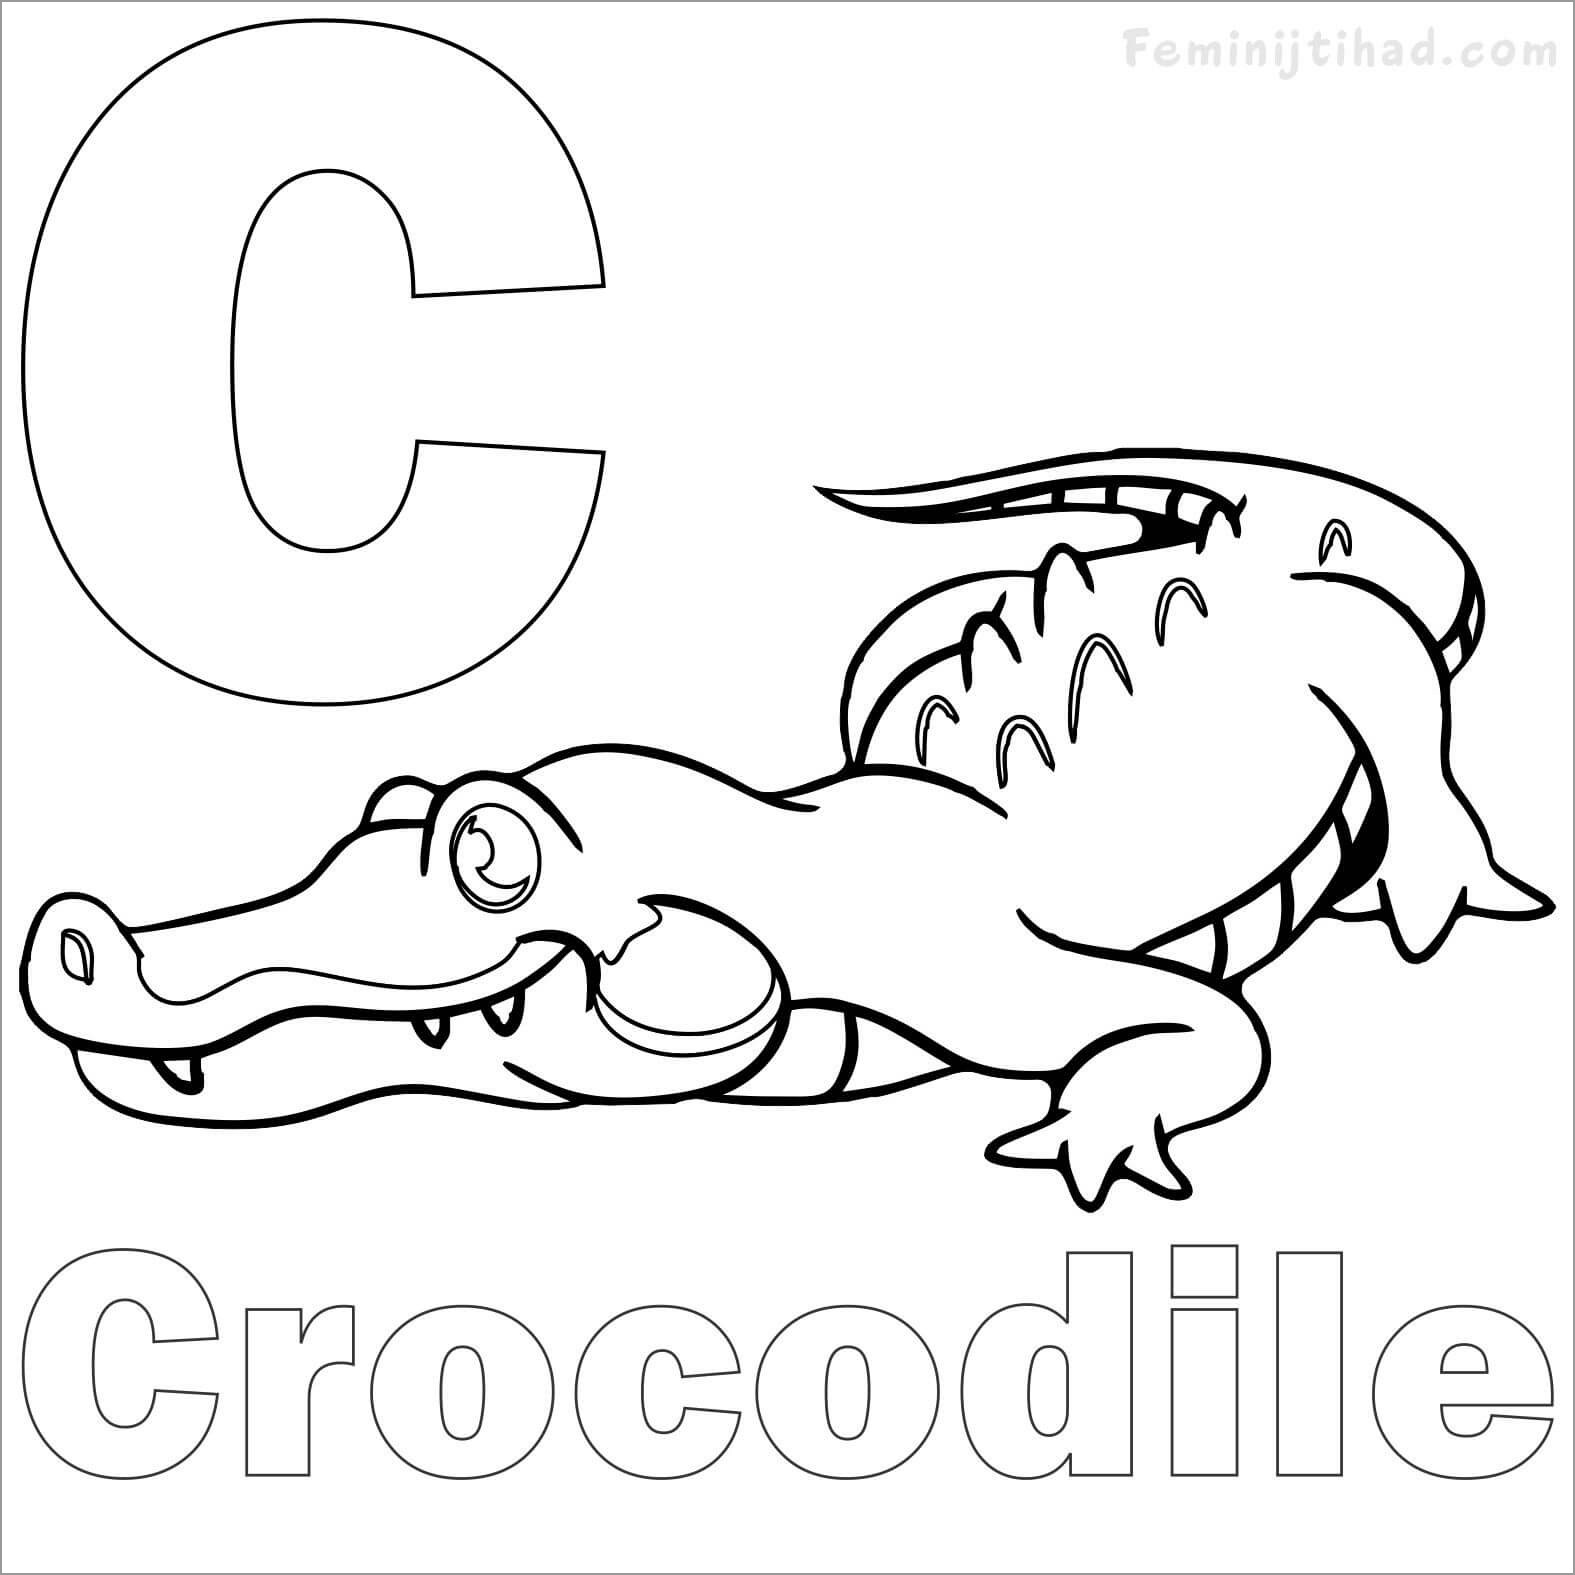 C for Crocodile Coloring Pages for Kids